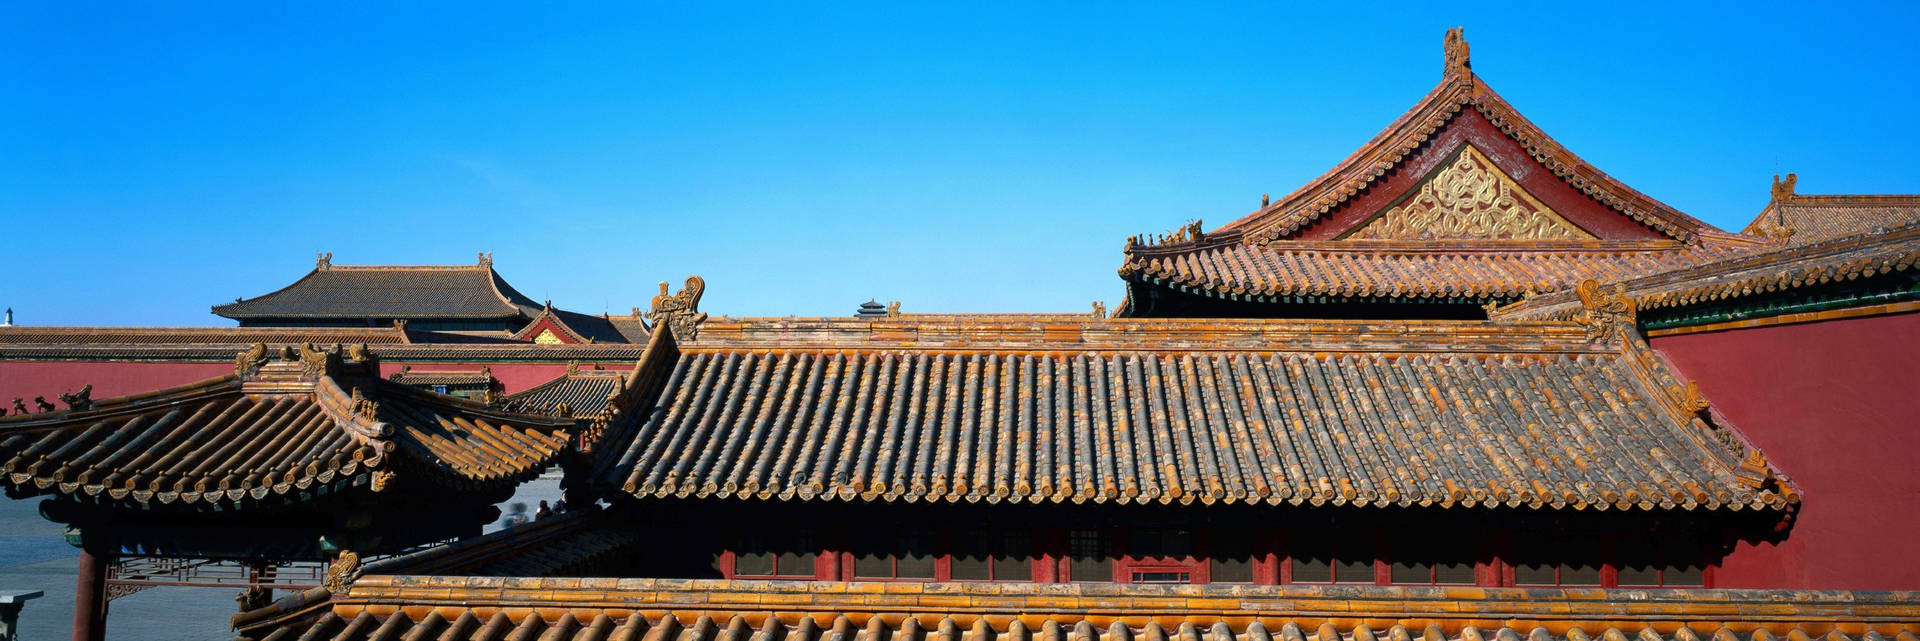 Traditional Chinese Roofs Forbidden City Picture